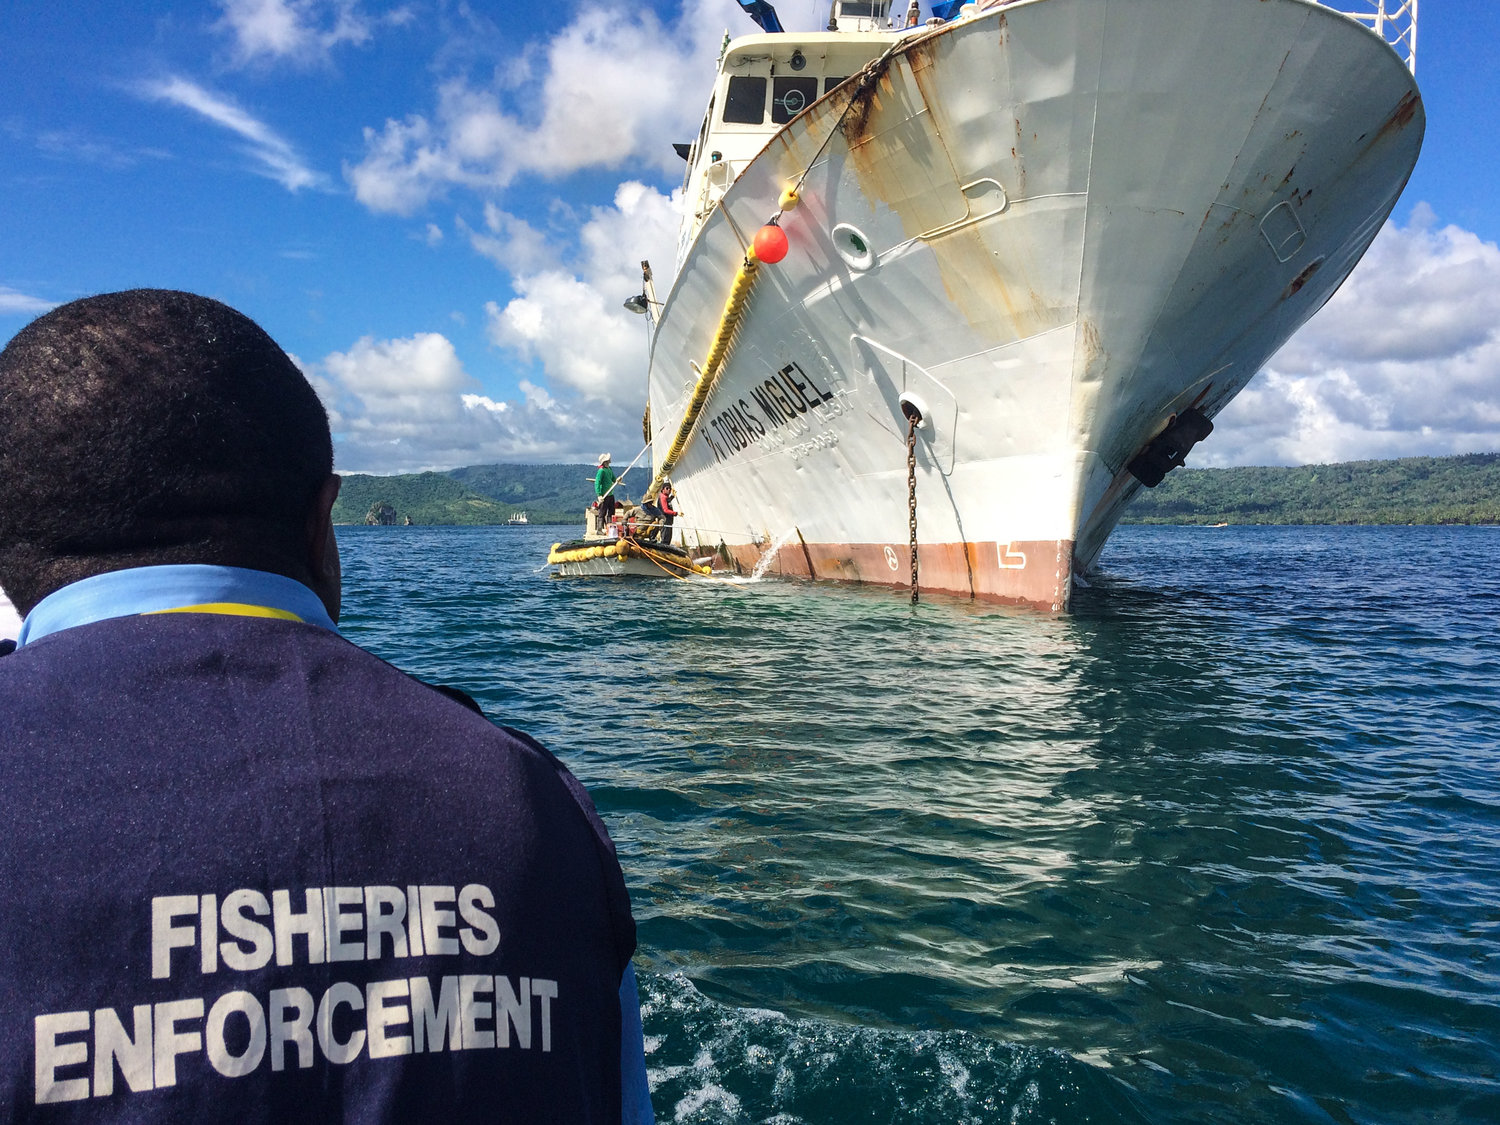 Pacific fisheries surveillance finds no breaches